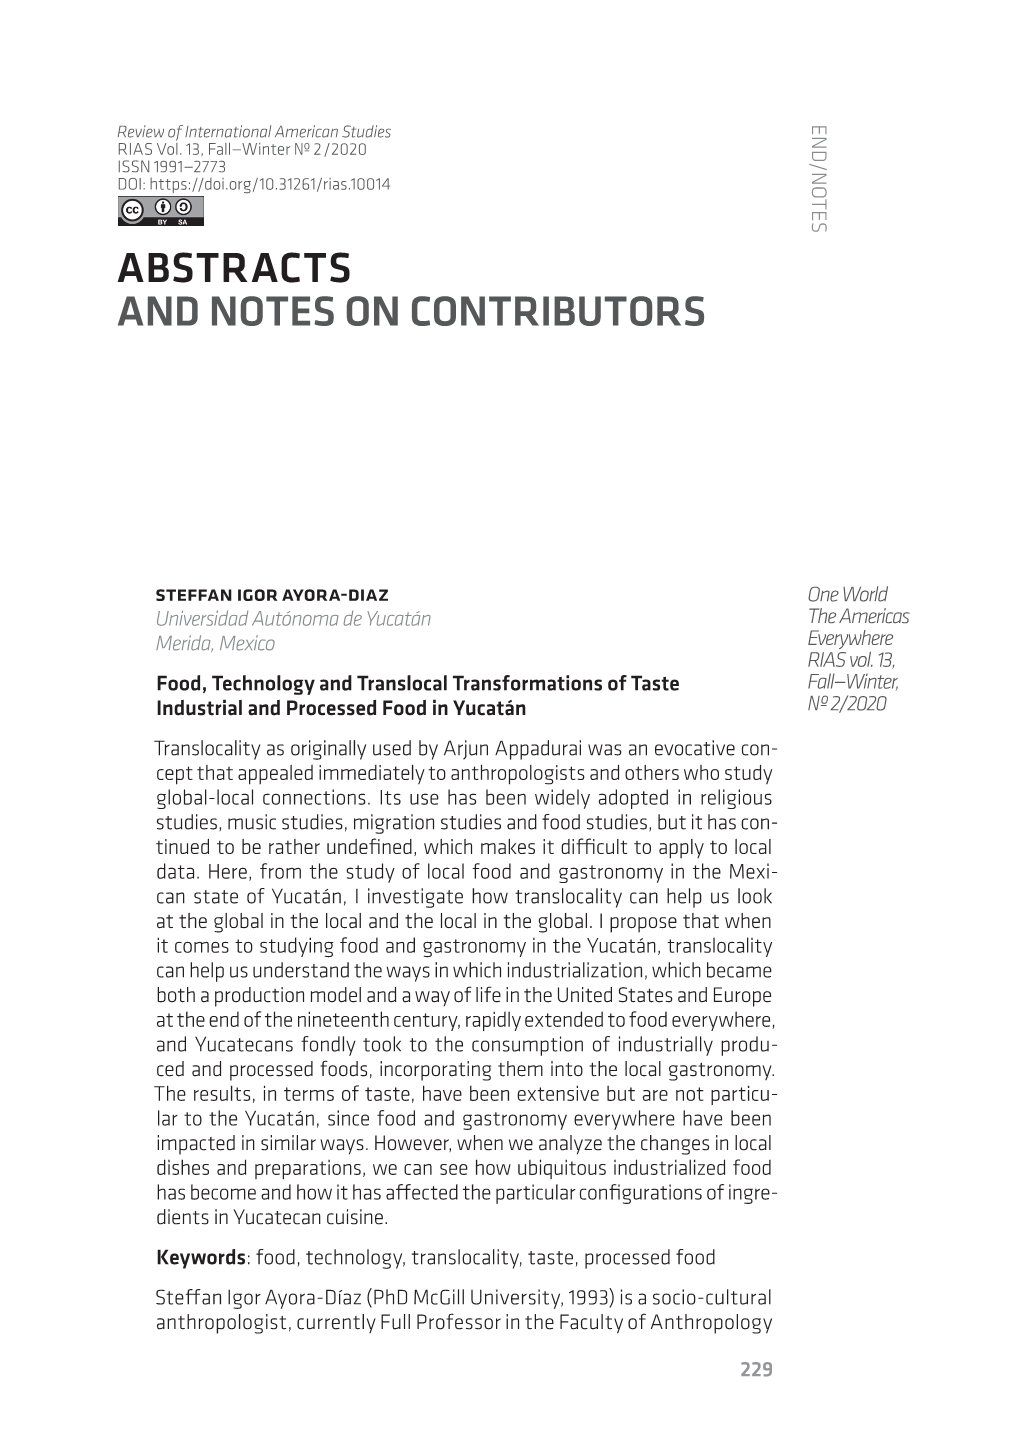 Abstracts and Notes on Contributors